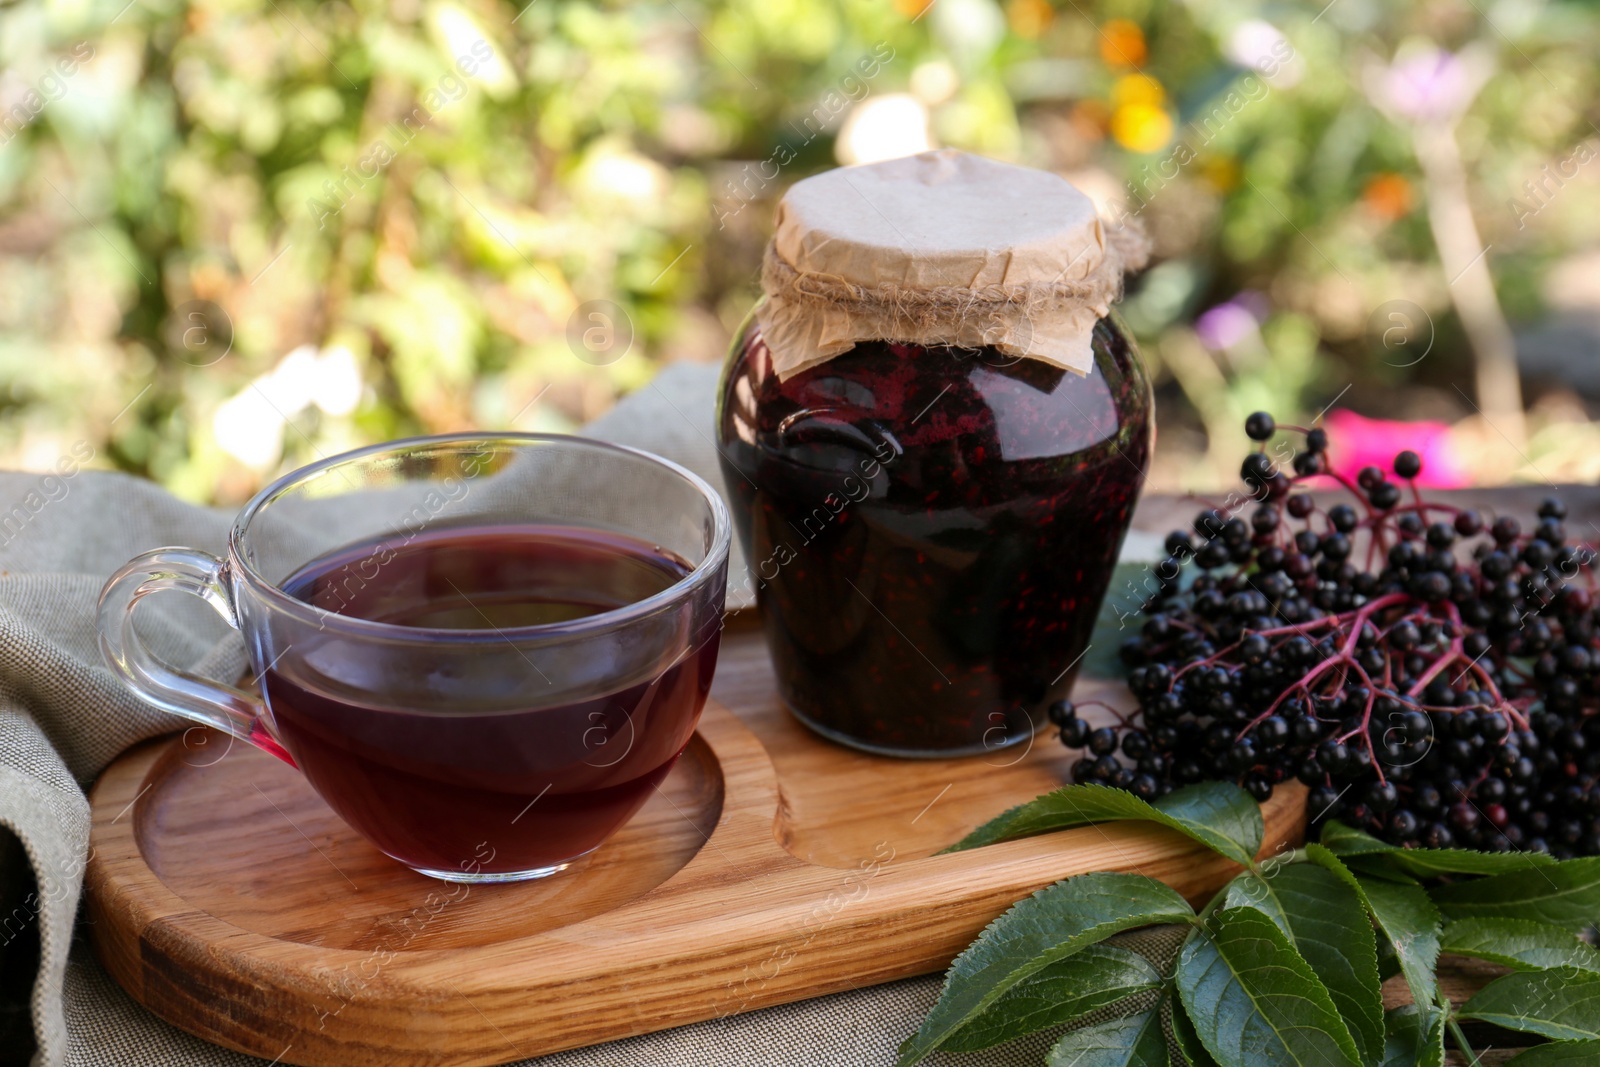 Photo of Elderberry jam, glass cup of tea and Sambucus berries on table outdoors